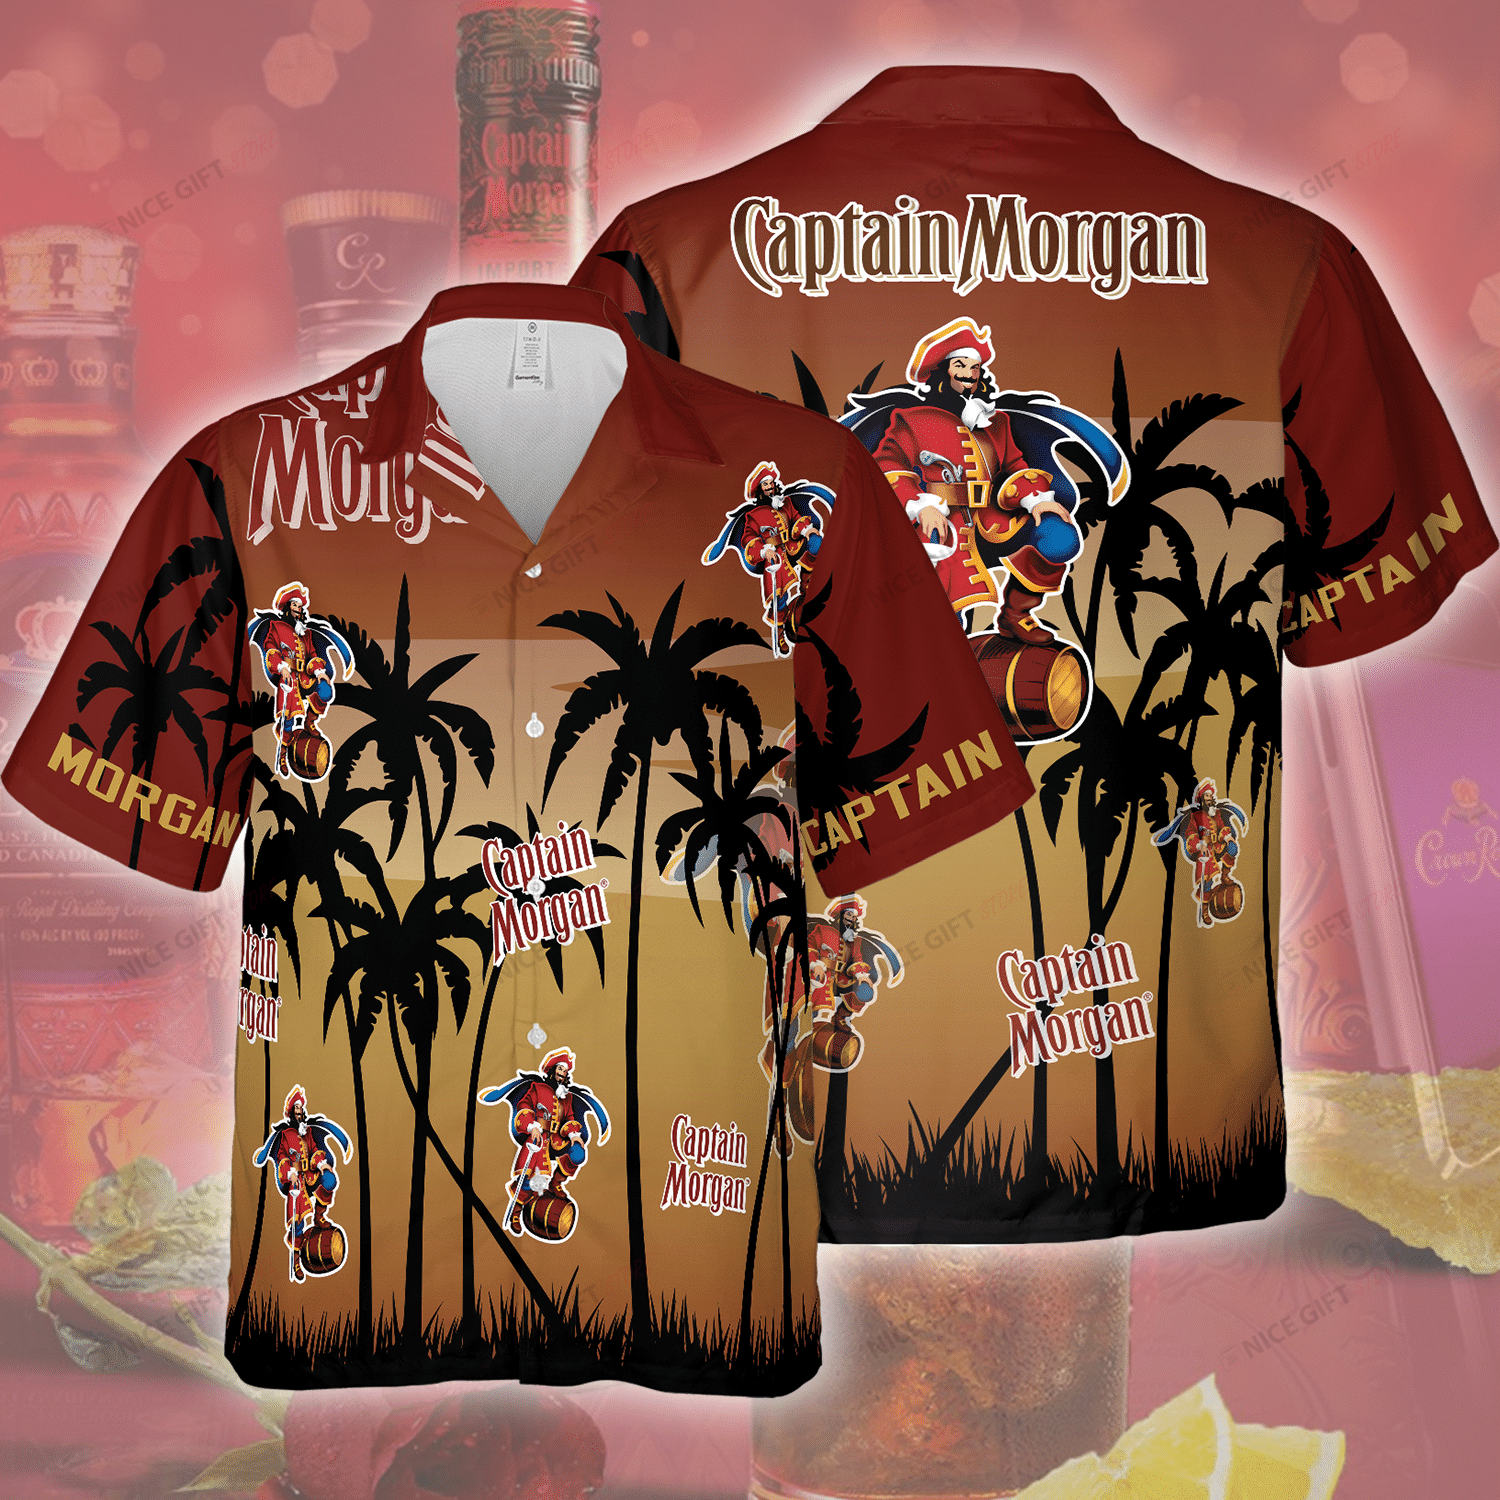 If you're a fan of a Hawaiian Shirt, you can choose one at our store 219